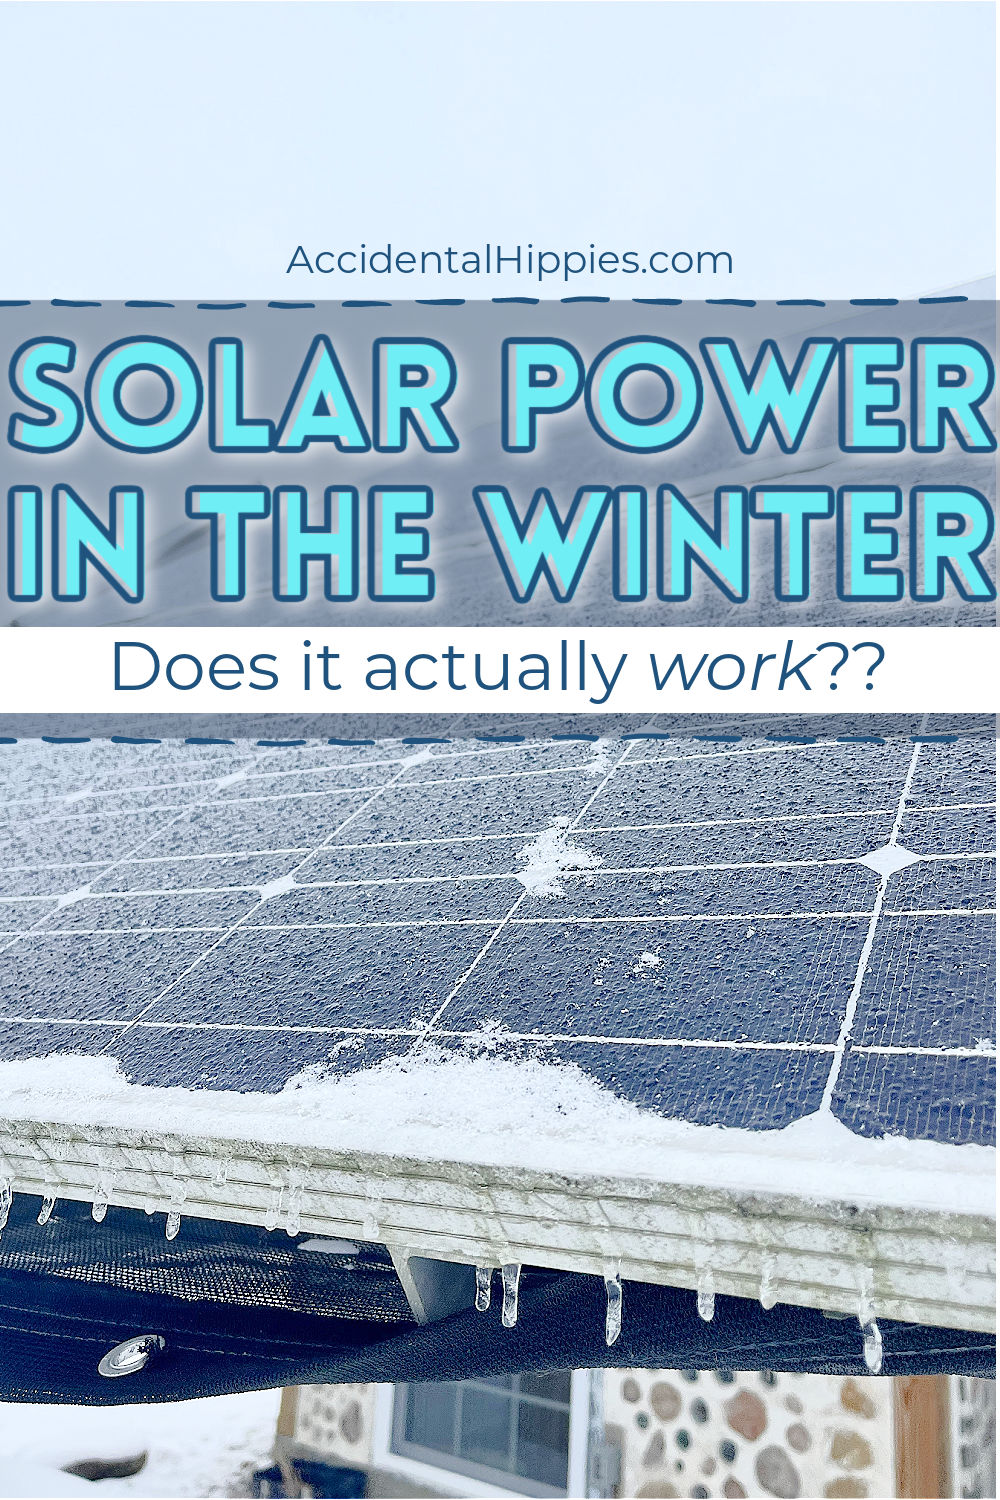 Image: Solar panels with snow and ice dripping from the bottom
Text: Solar Power in the Winter: Does it Actually Work?